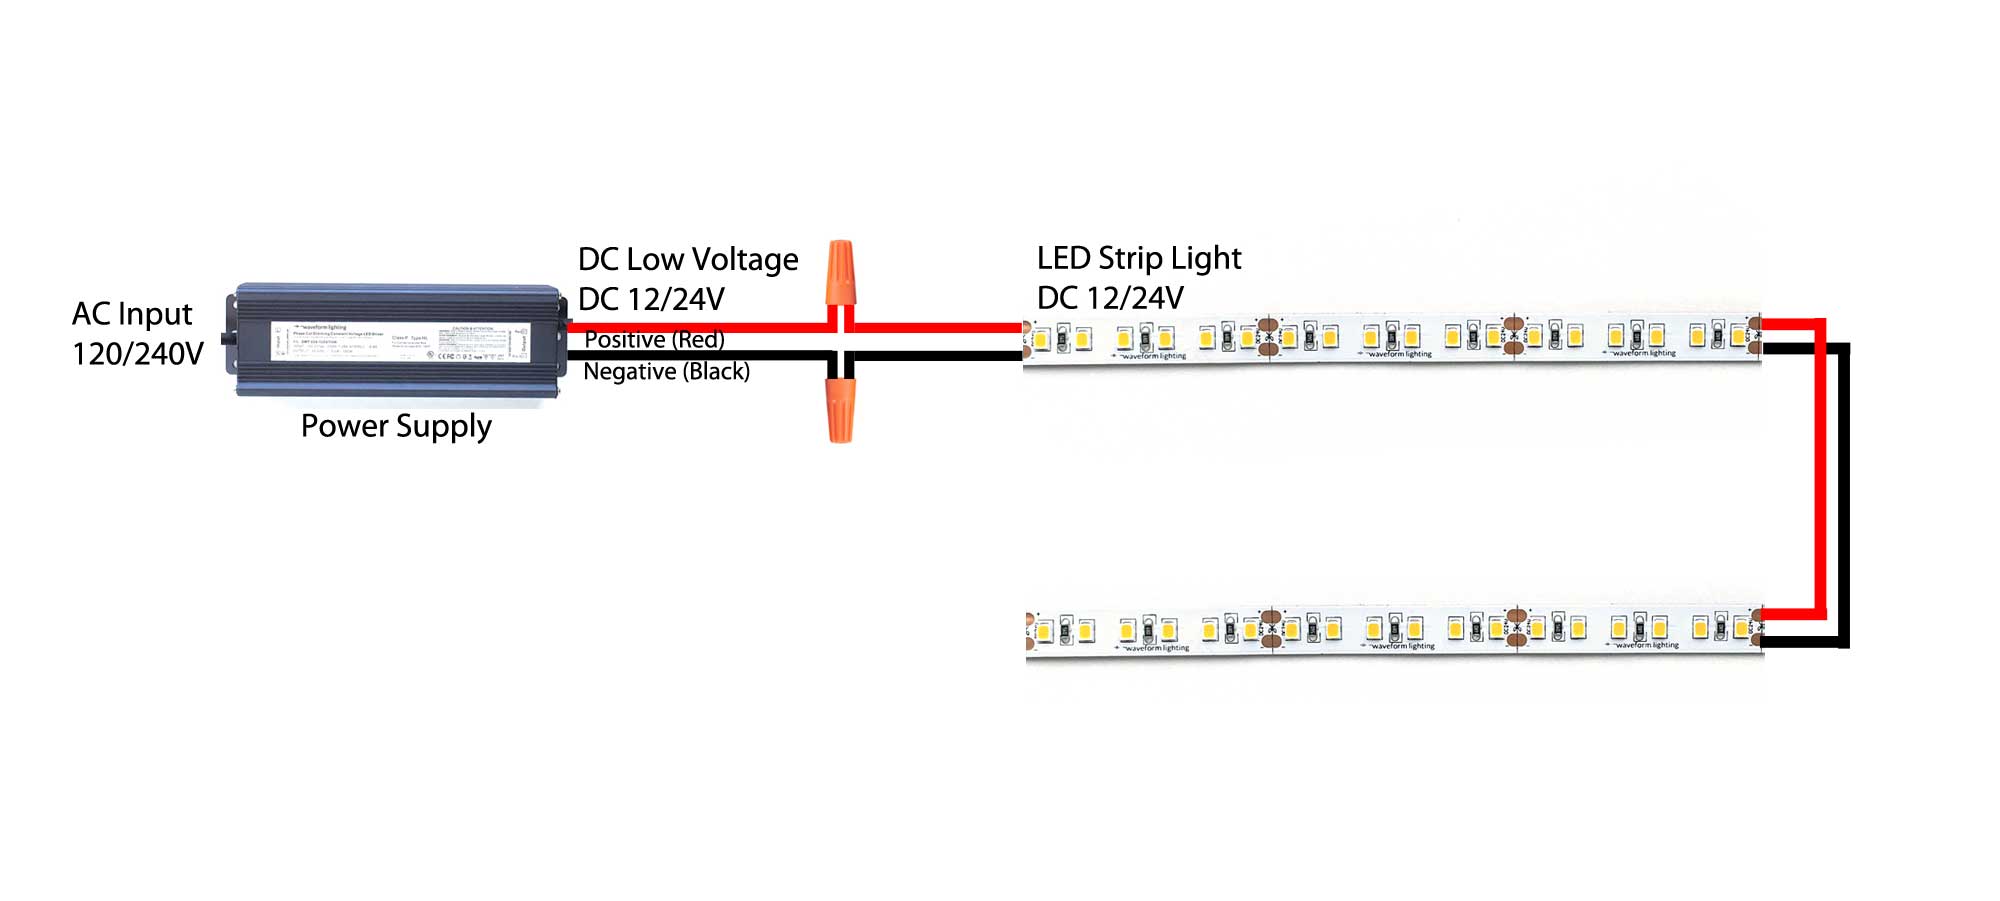 Connecting LED Strips in Series vs Parallel